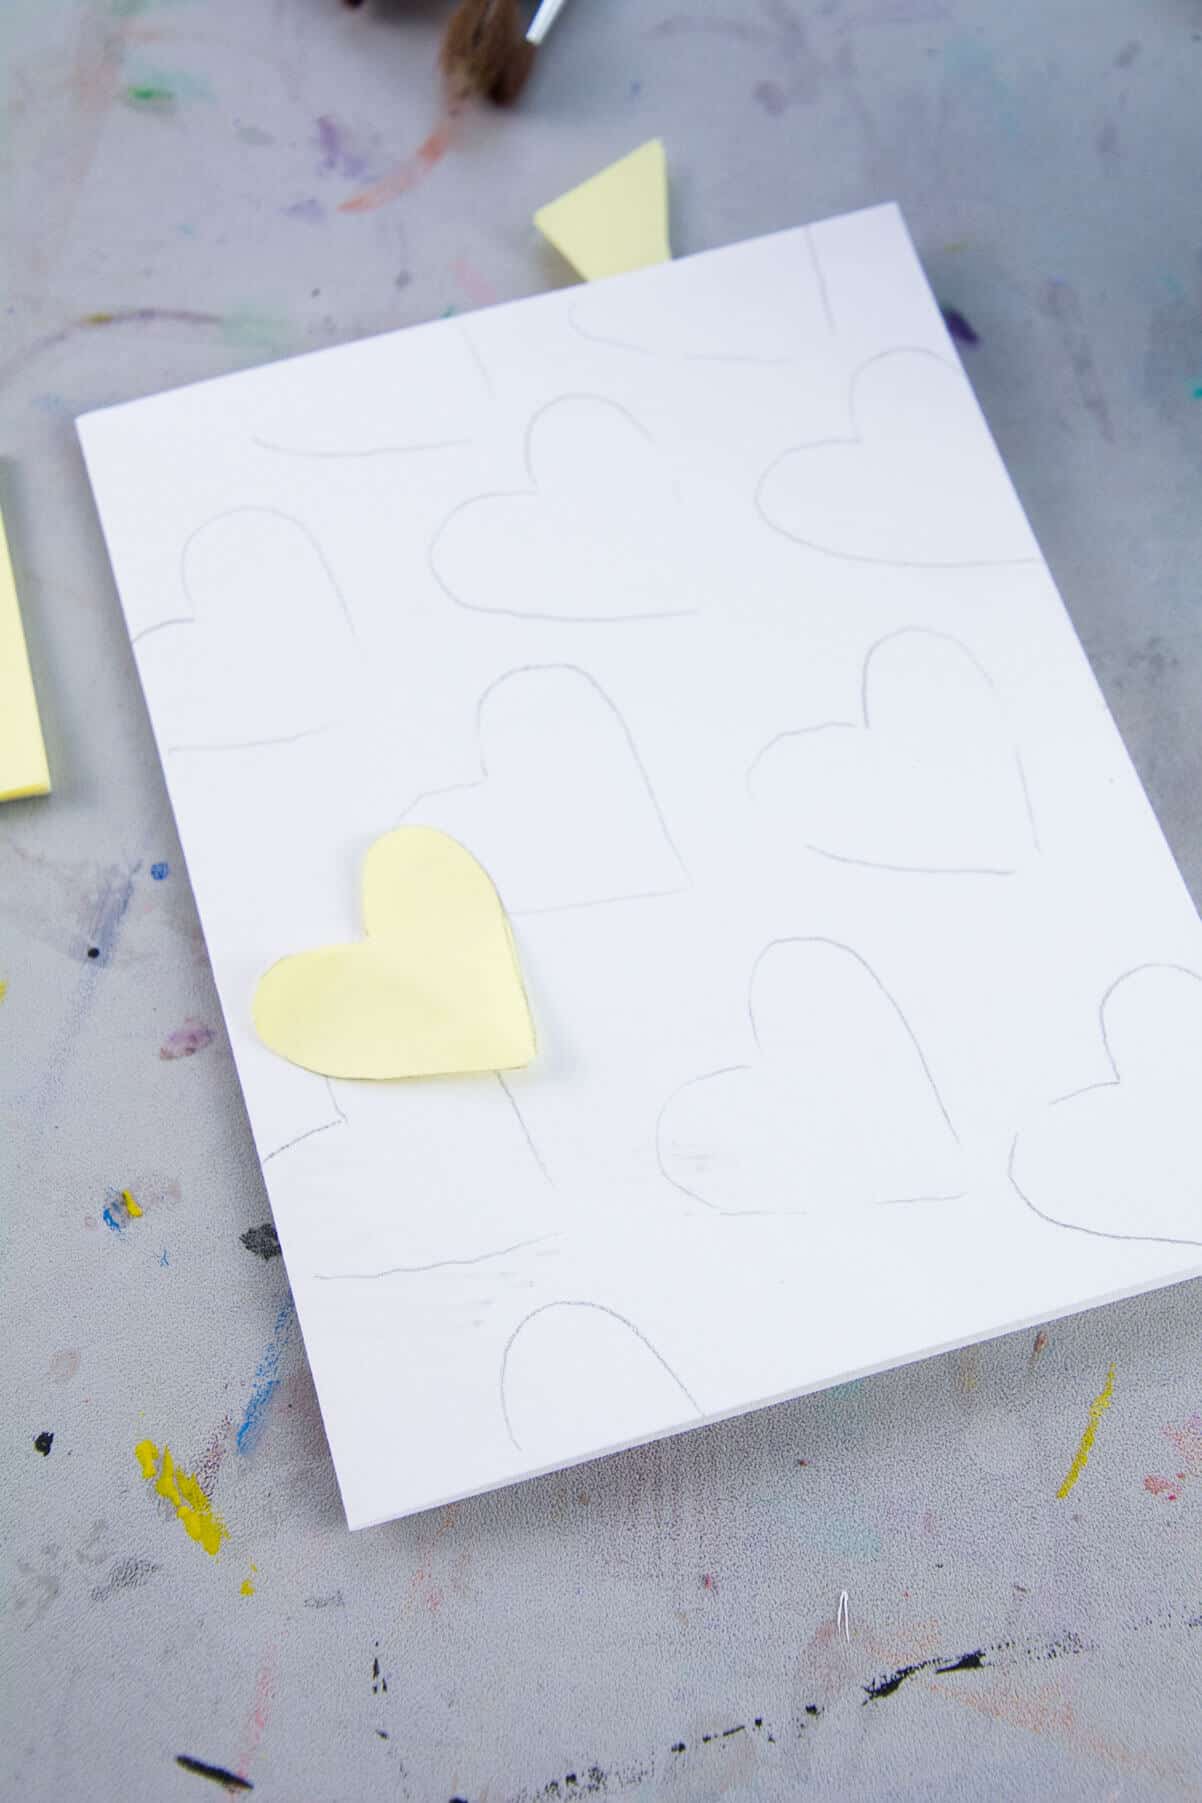 yellow paper heart sitting on white paper with hearts drawn in pencil.